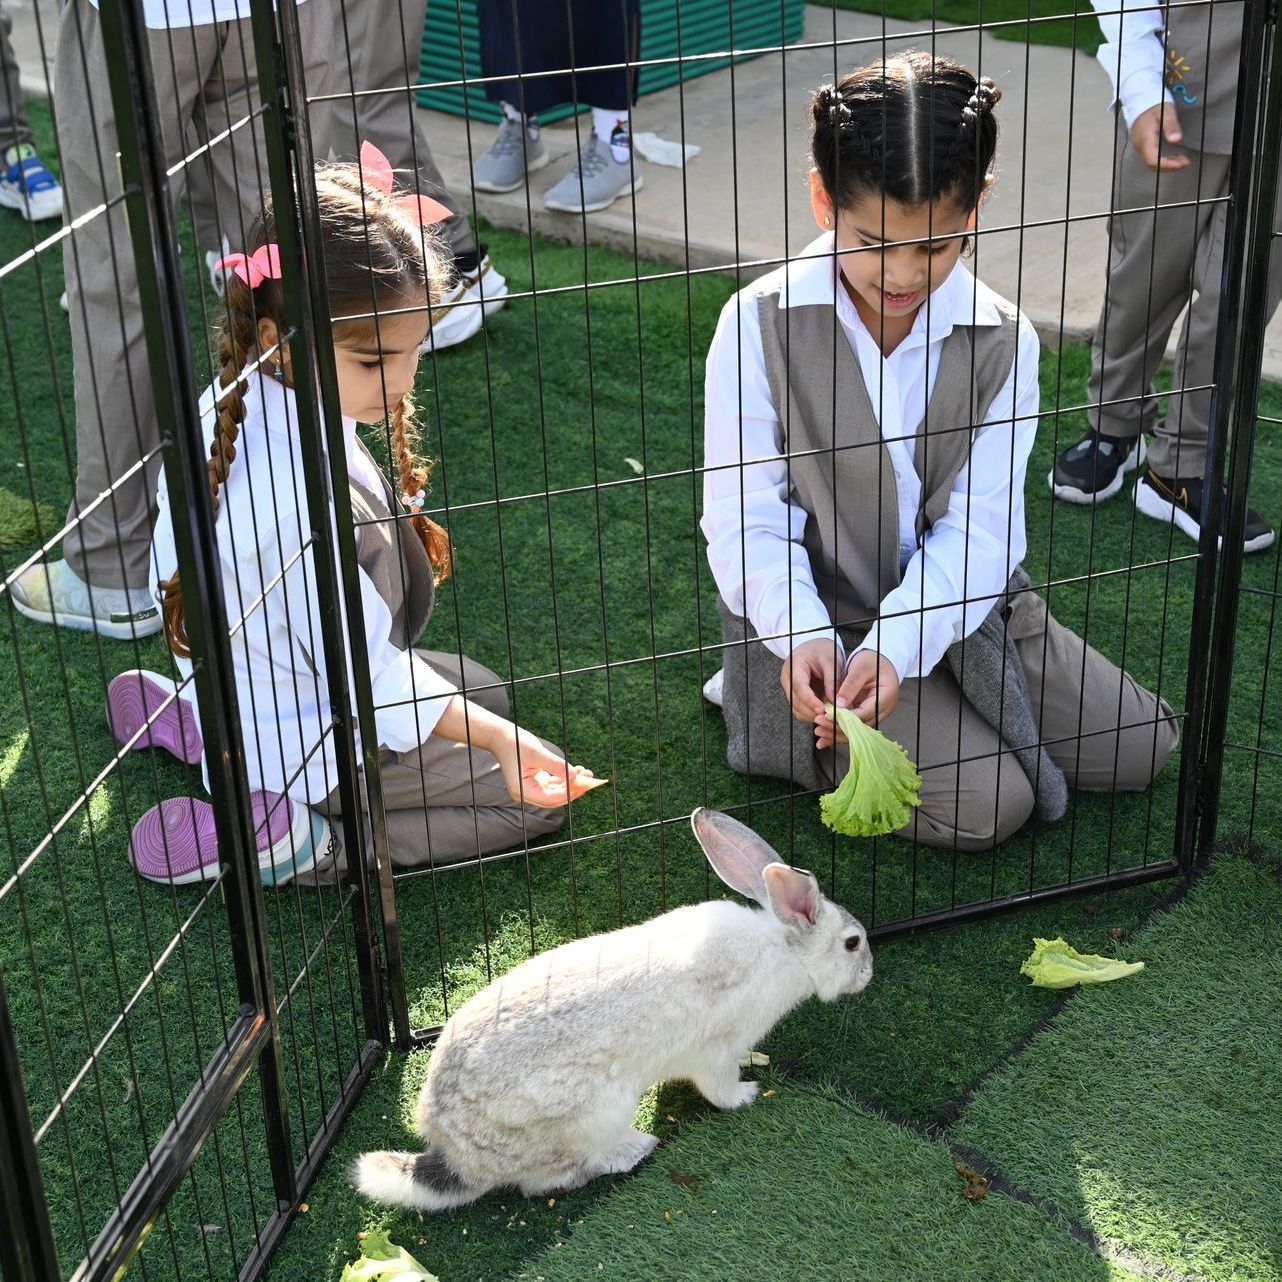 A boy and a girl are playing with a rabbit in a cage.